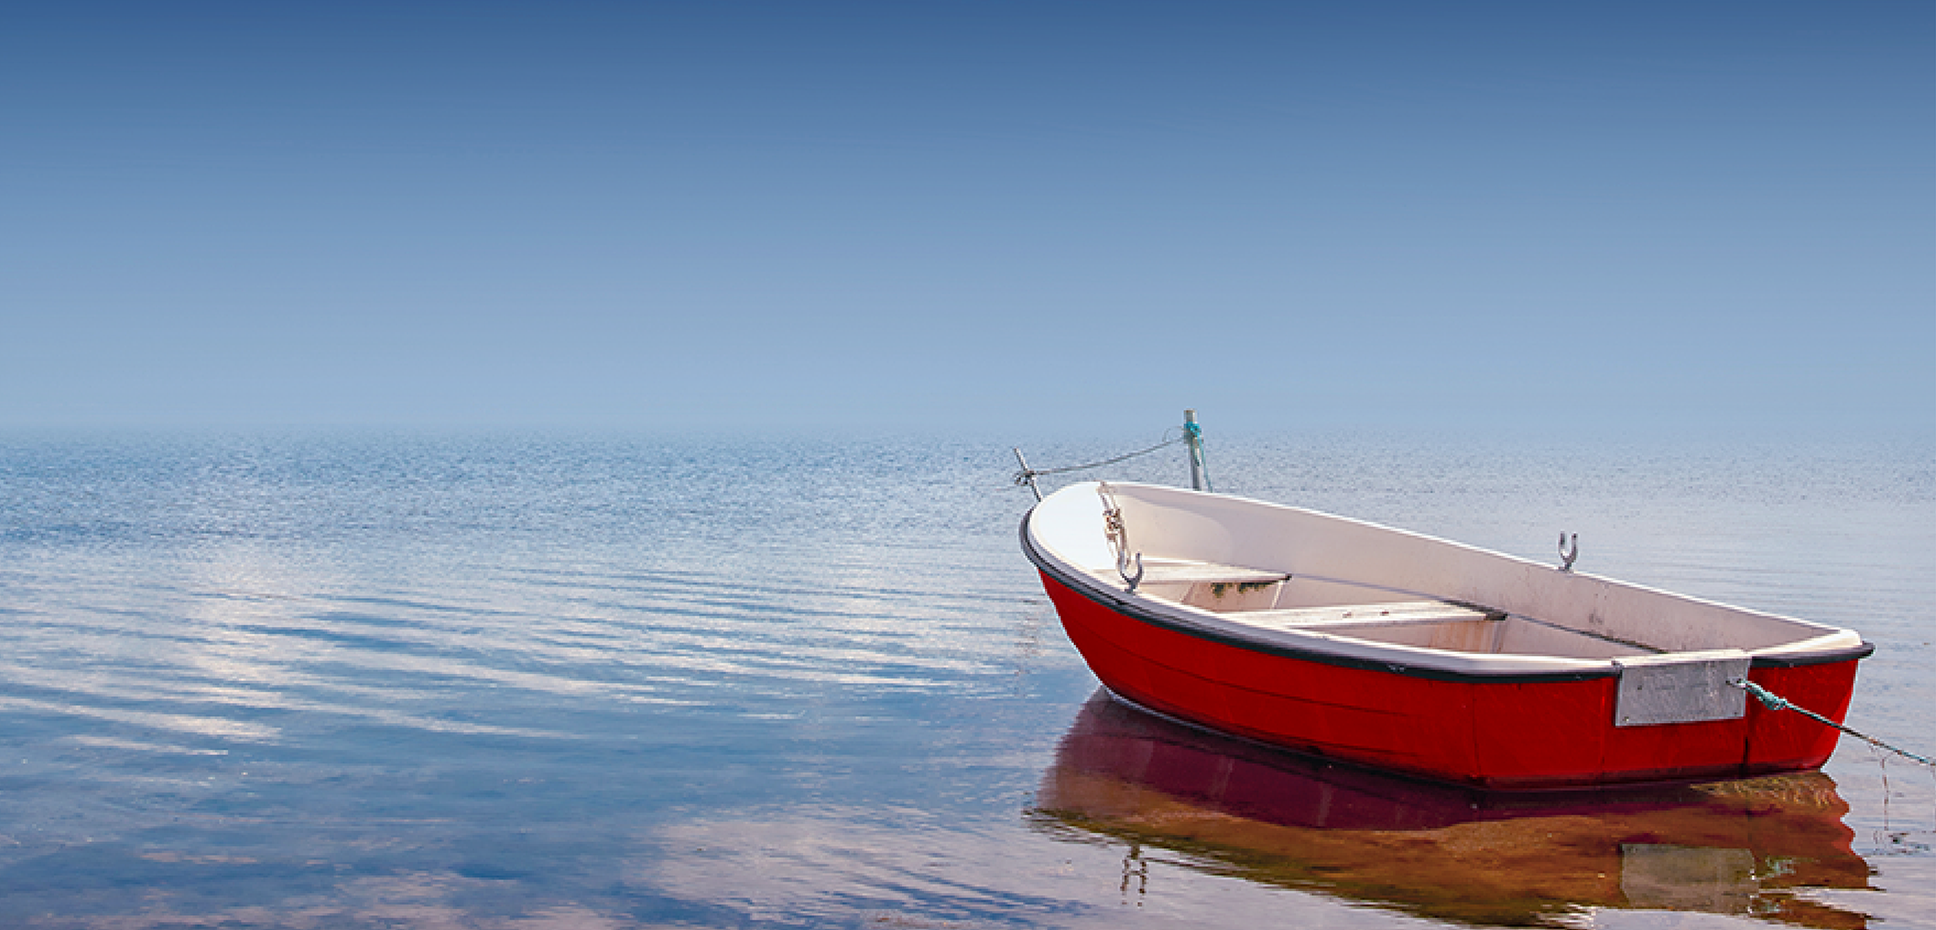 A red hulled boat floats out into a calm sea